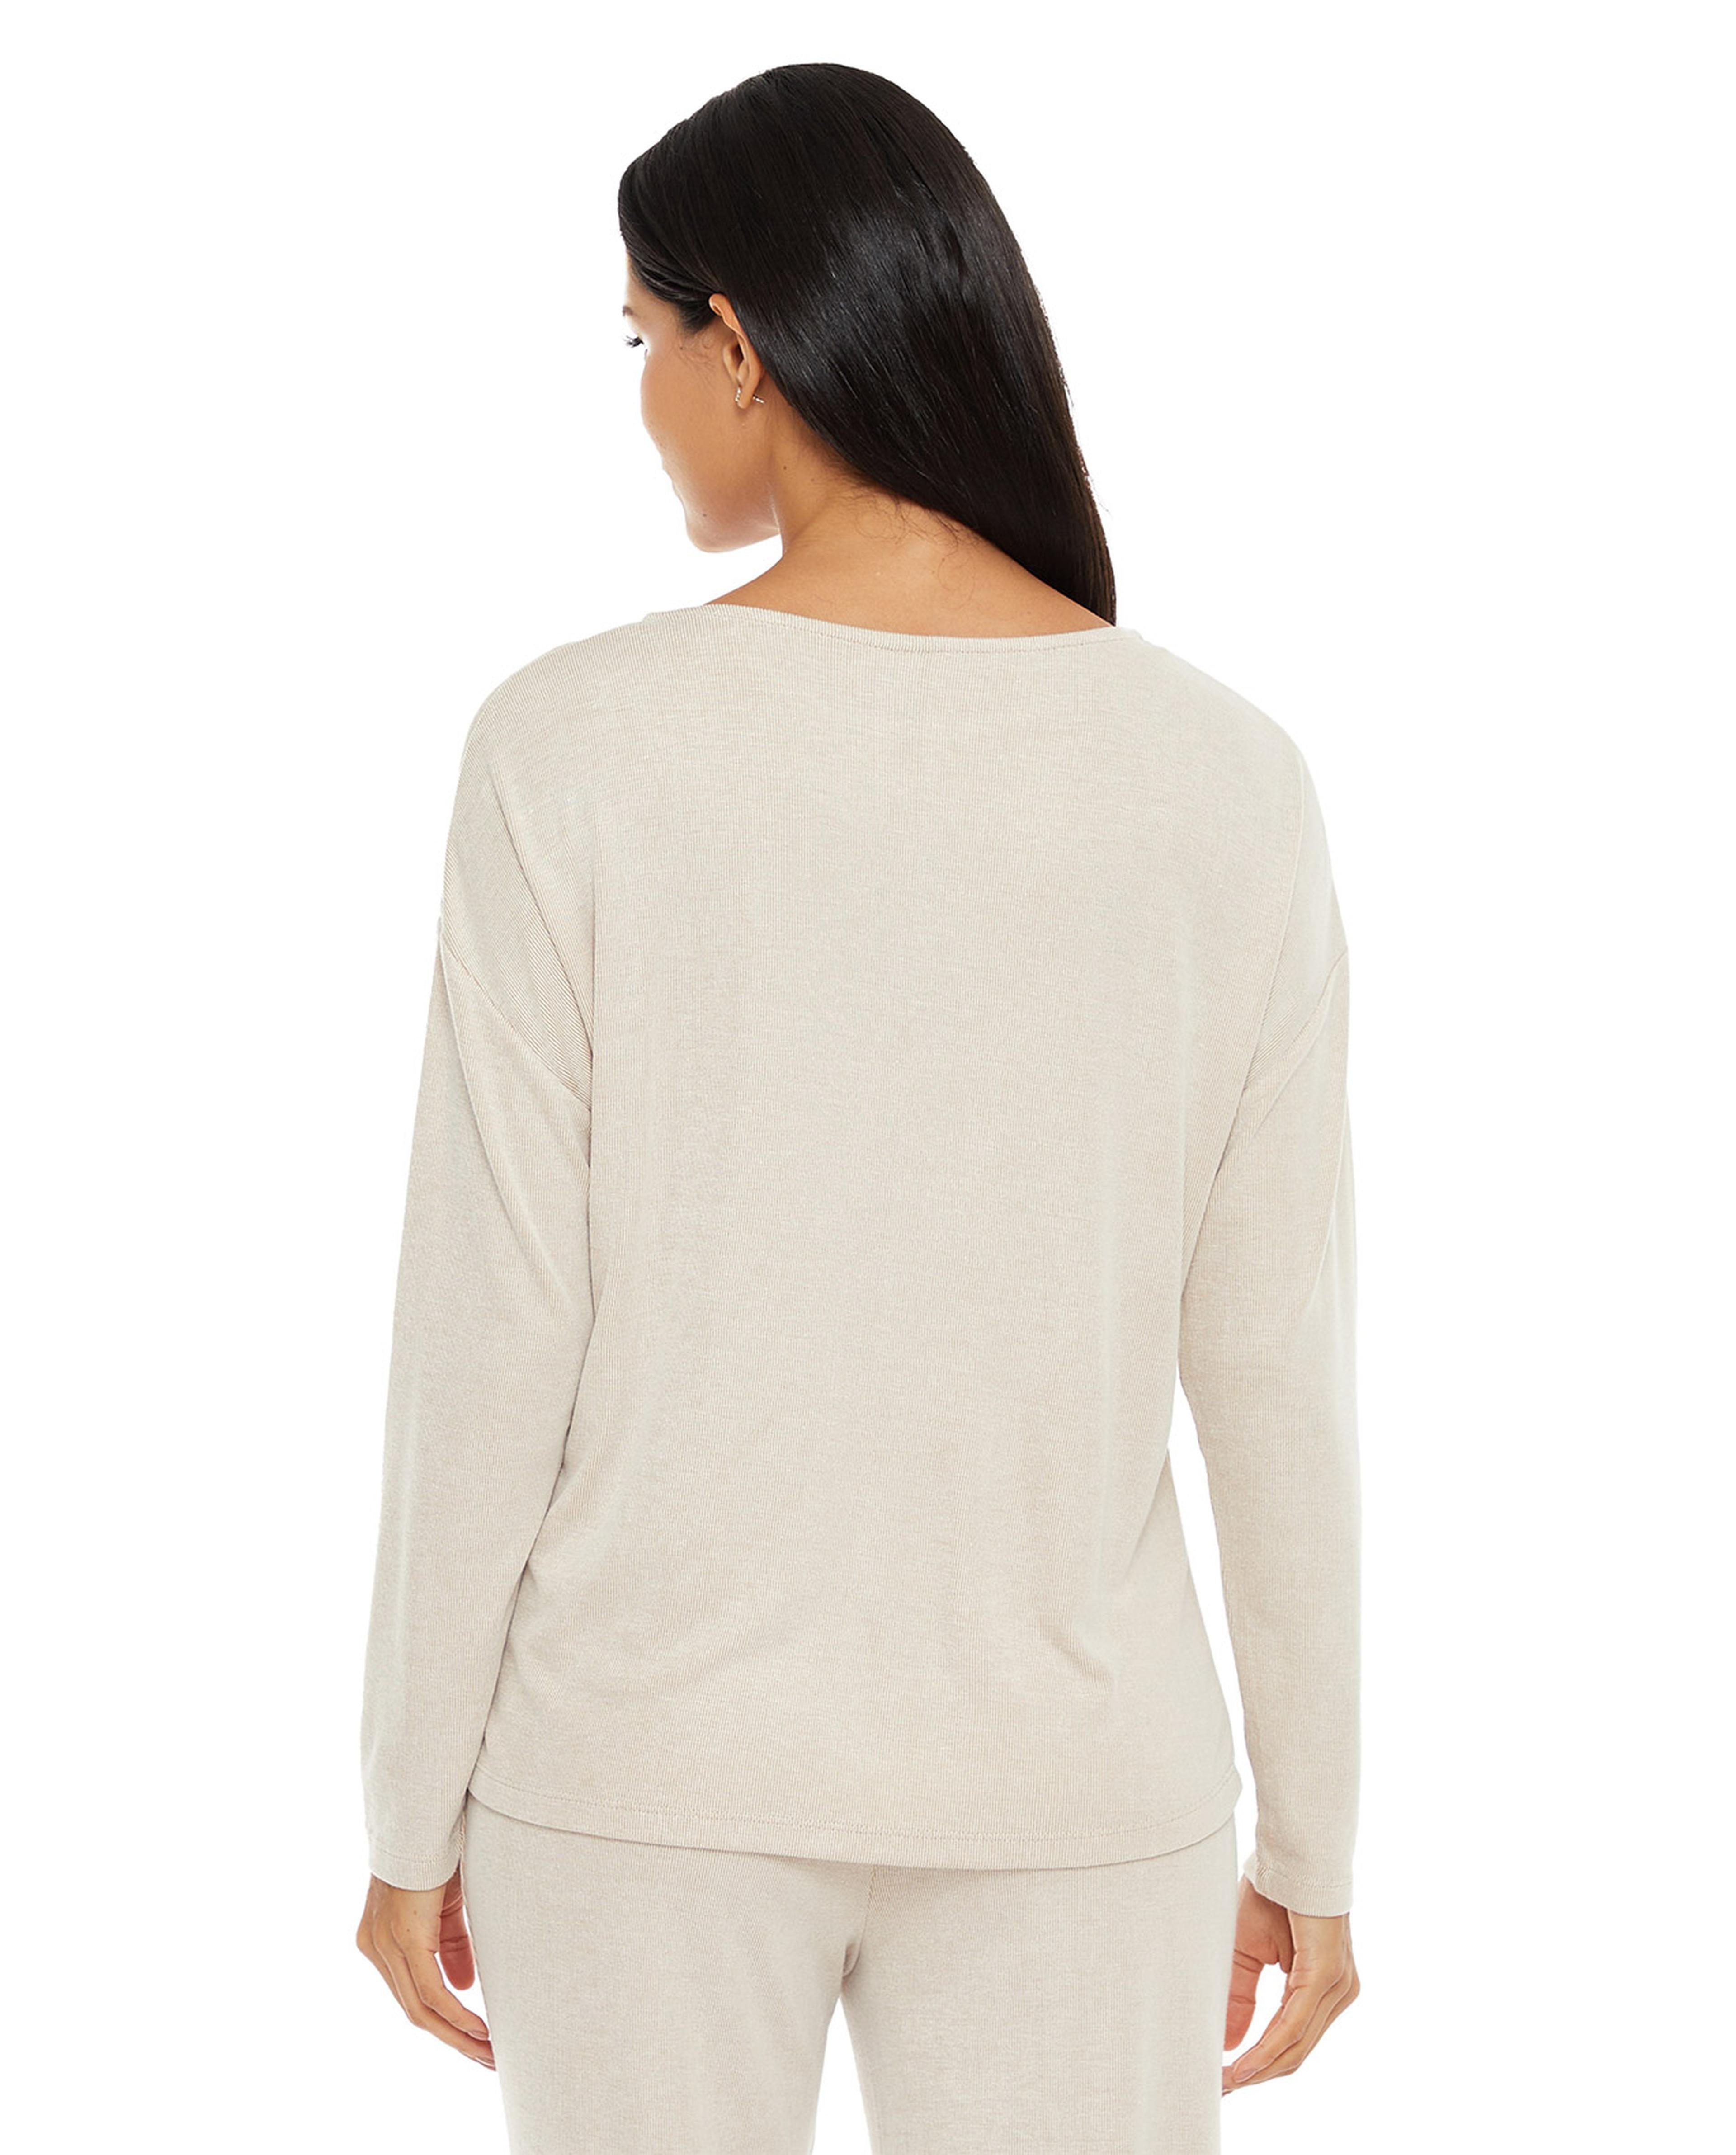 Solid Sleep Top with Round Neck and Long Sleeves